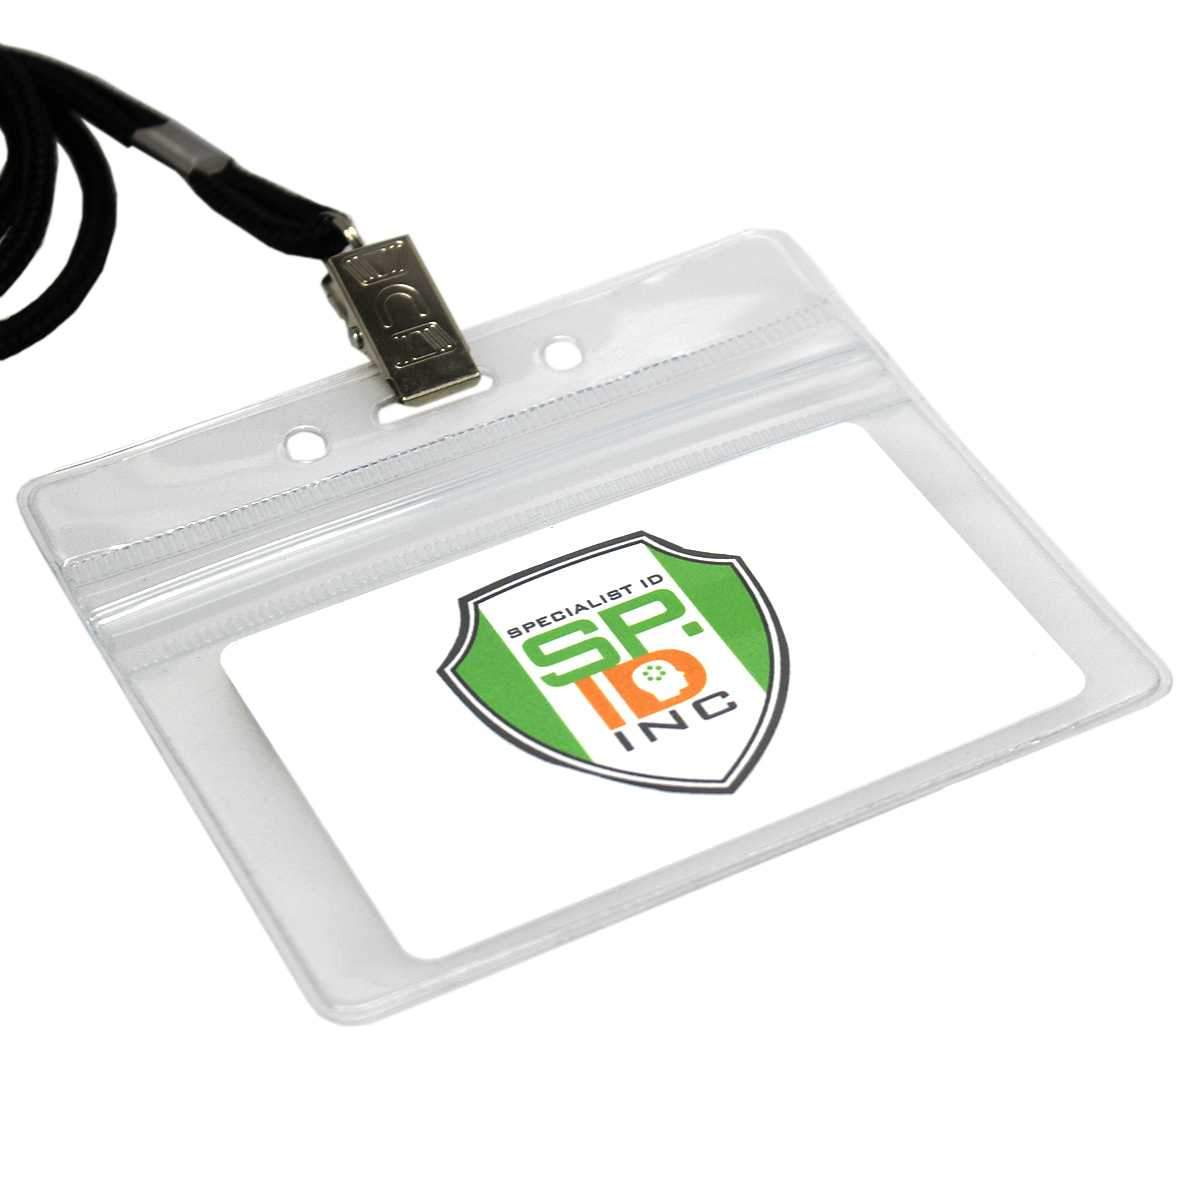 Horizontal Vinyl Badge Holder with Zipper Top (506-ZHOS-CLR) with black lanyard and a white card inside displaying a logo with the text "SPECIALIST ID INC" on a shield, offering excellent ID card protection.